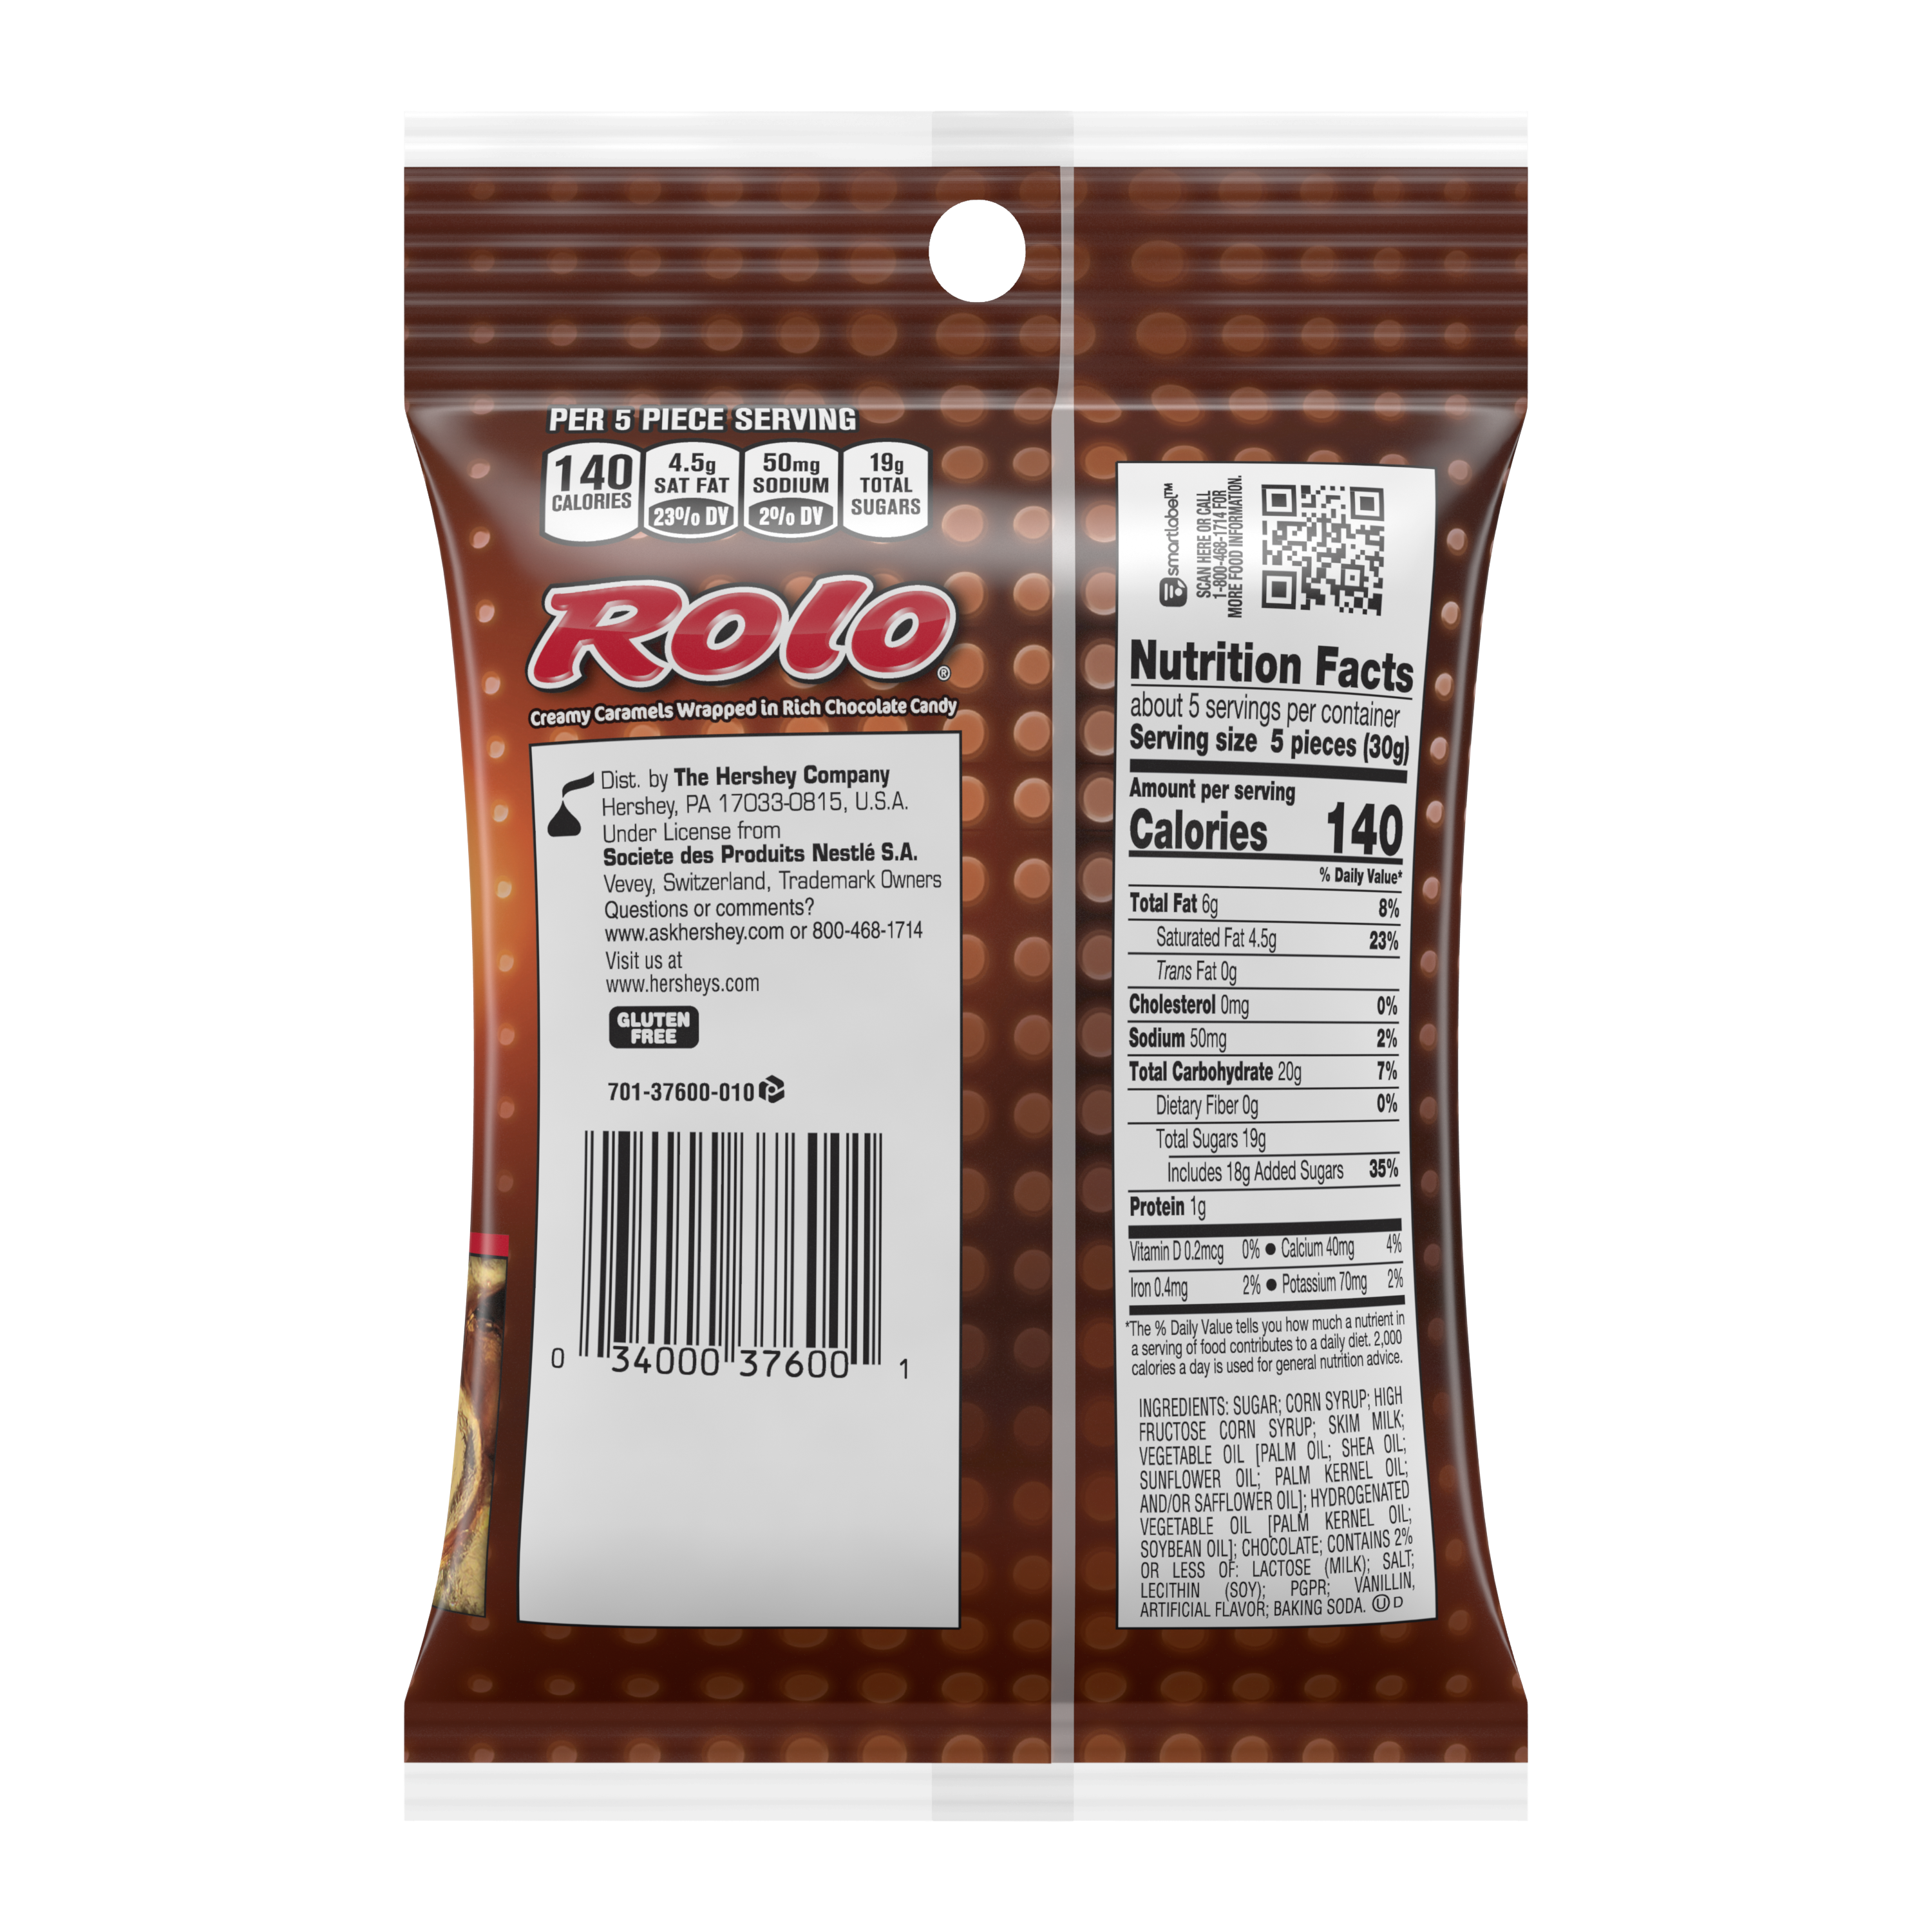 ROLO® Creamy Caramels in Rich Chocolate Candy, 5.3 oz bag - Back of Package